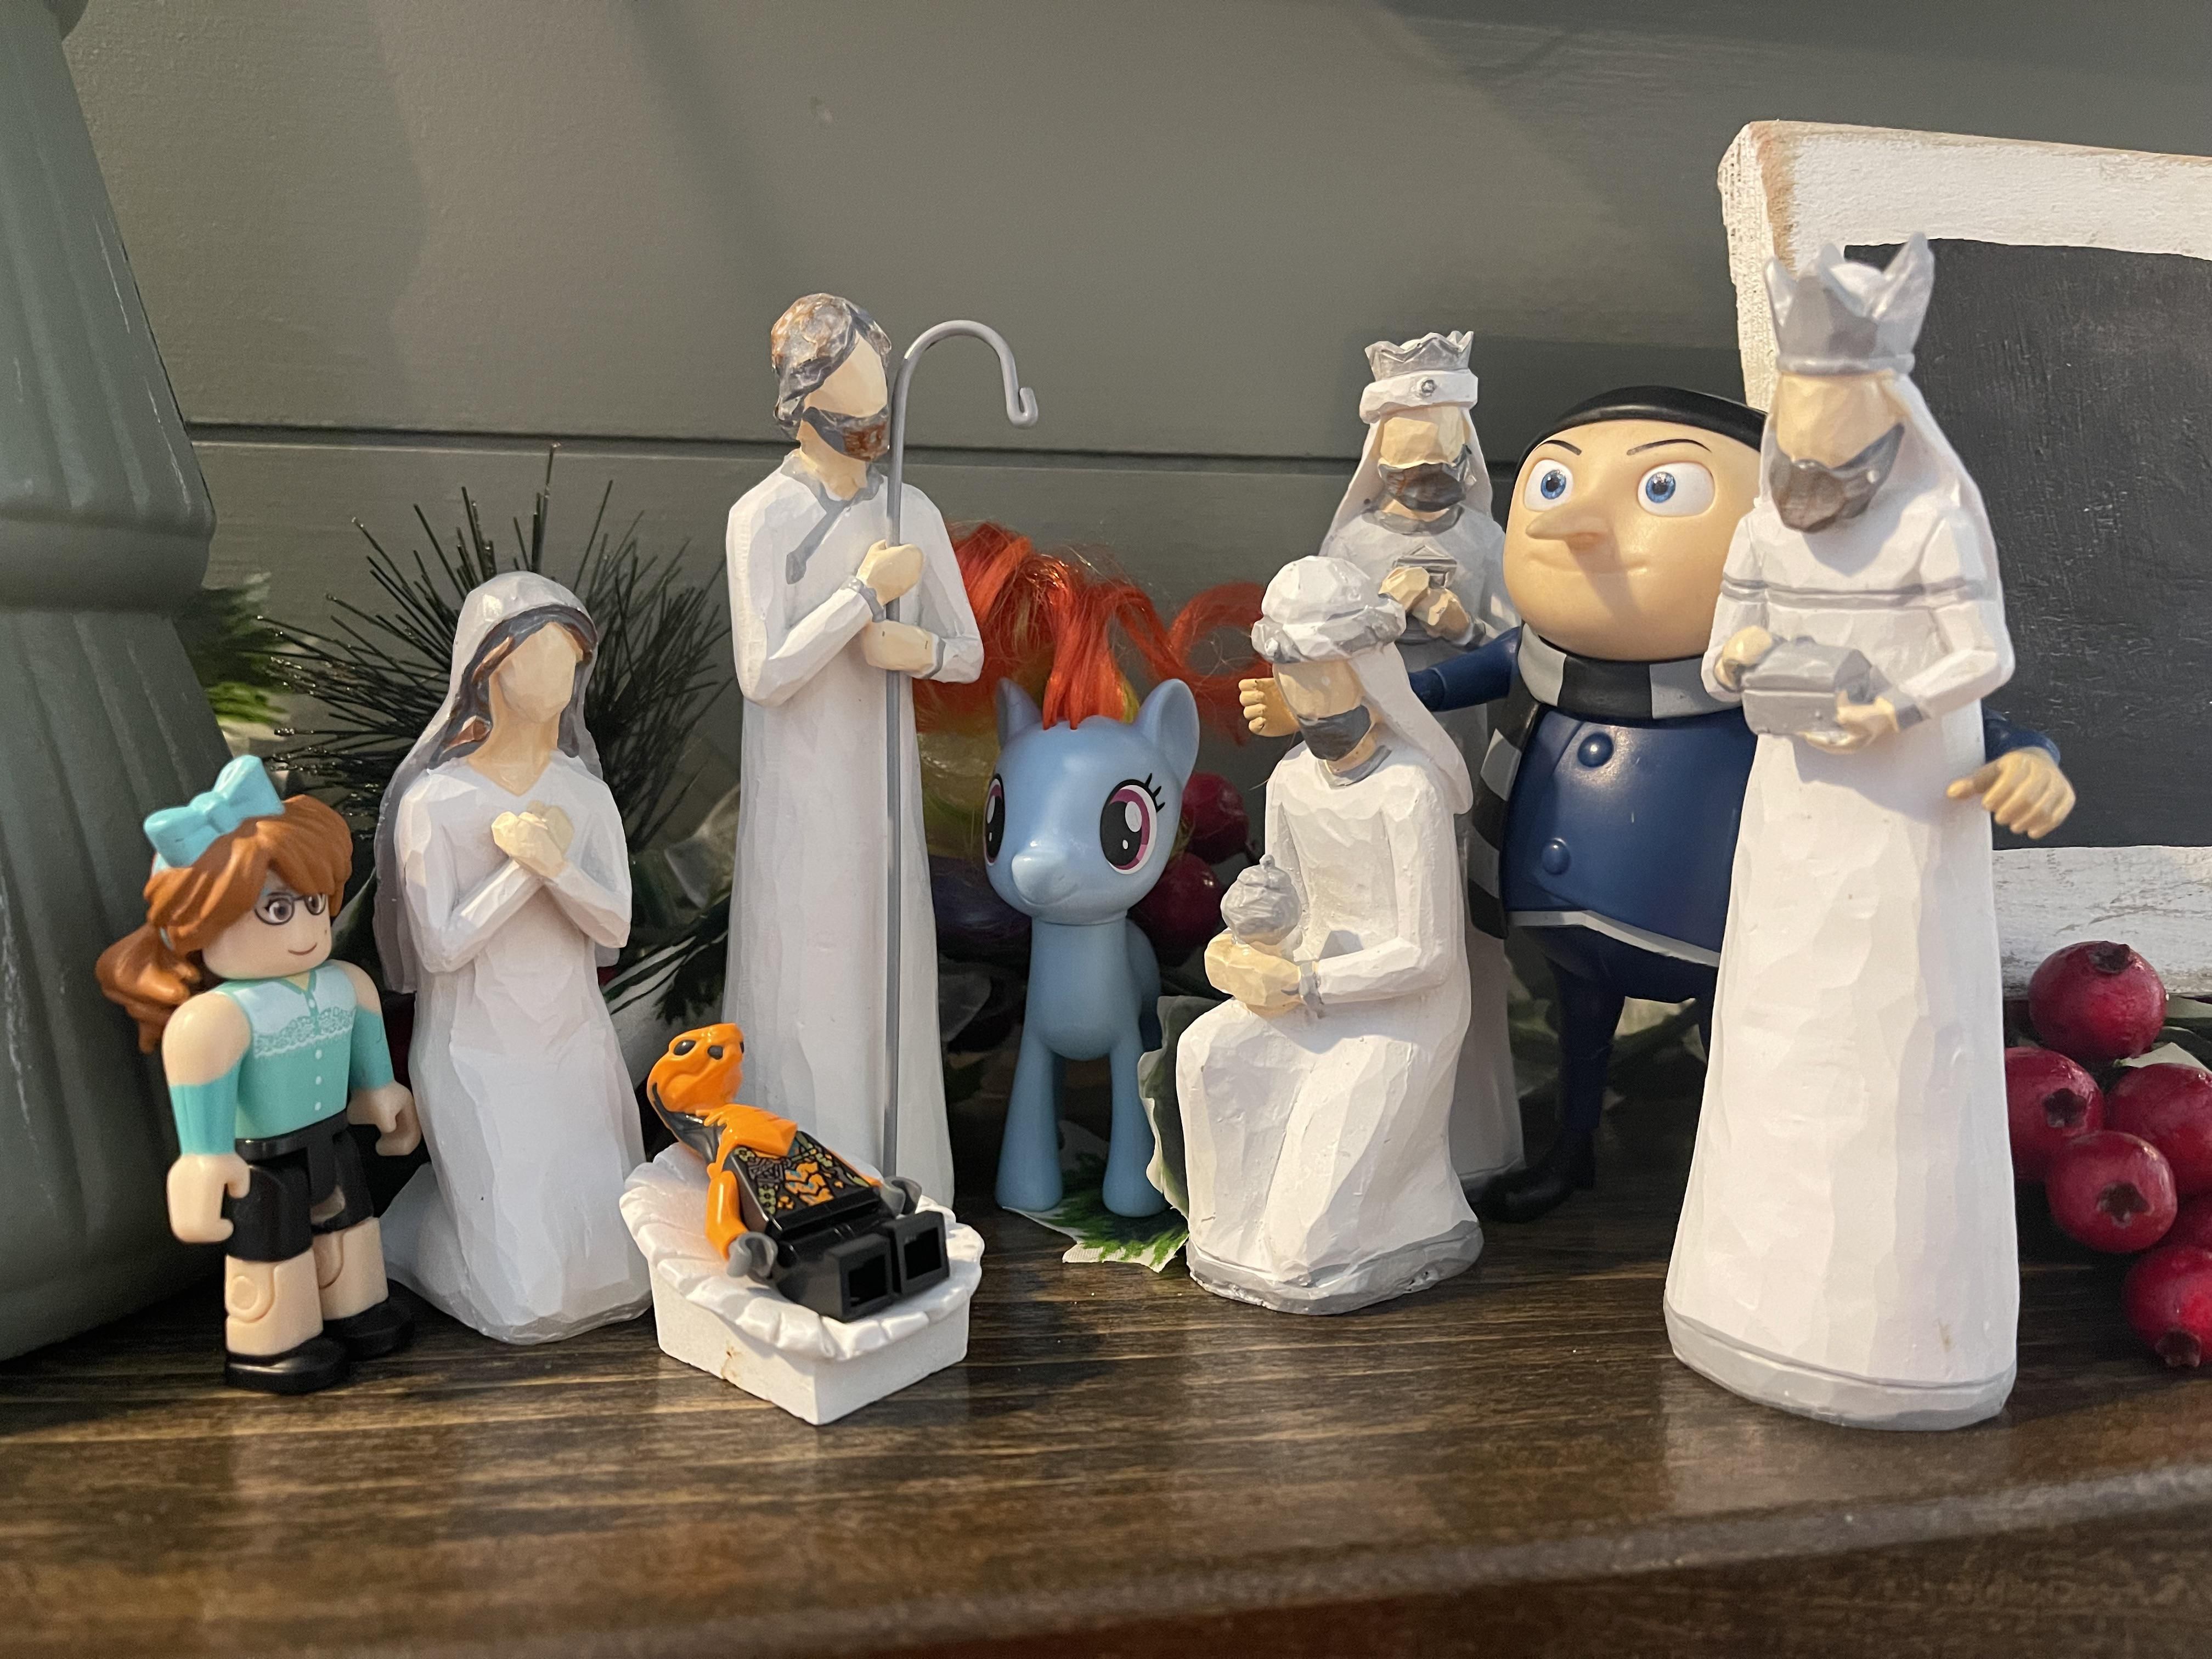 I’ll keep adding things to our nativity scene until my wife finds out day 4.